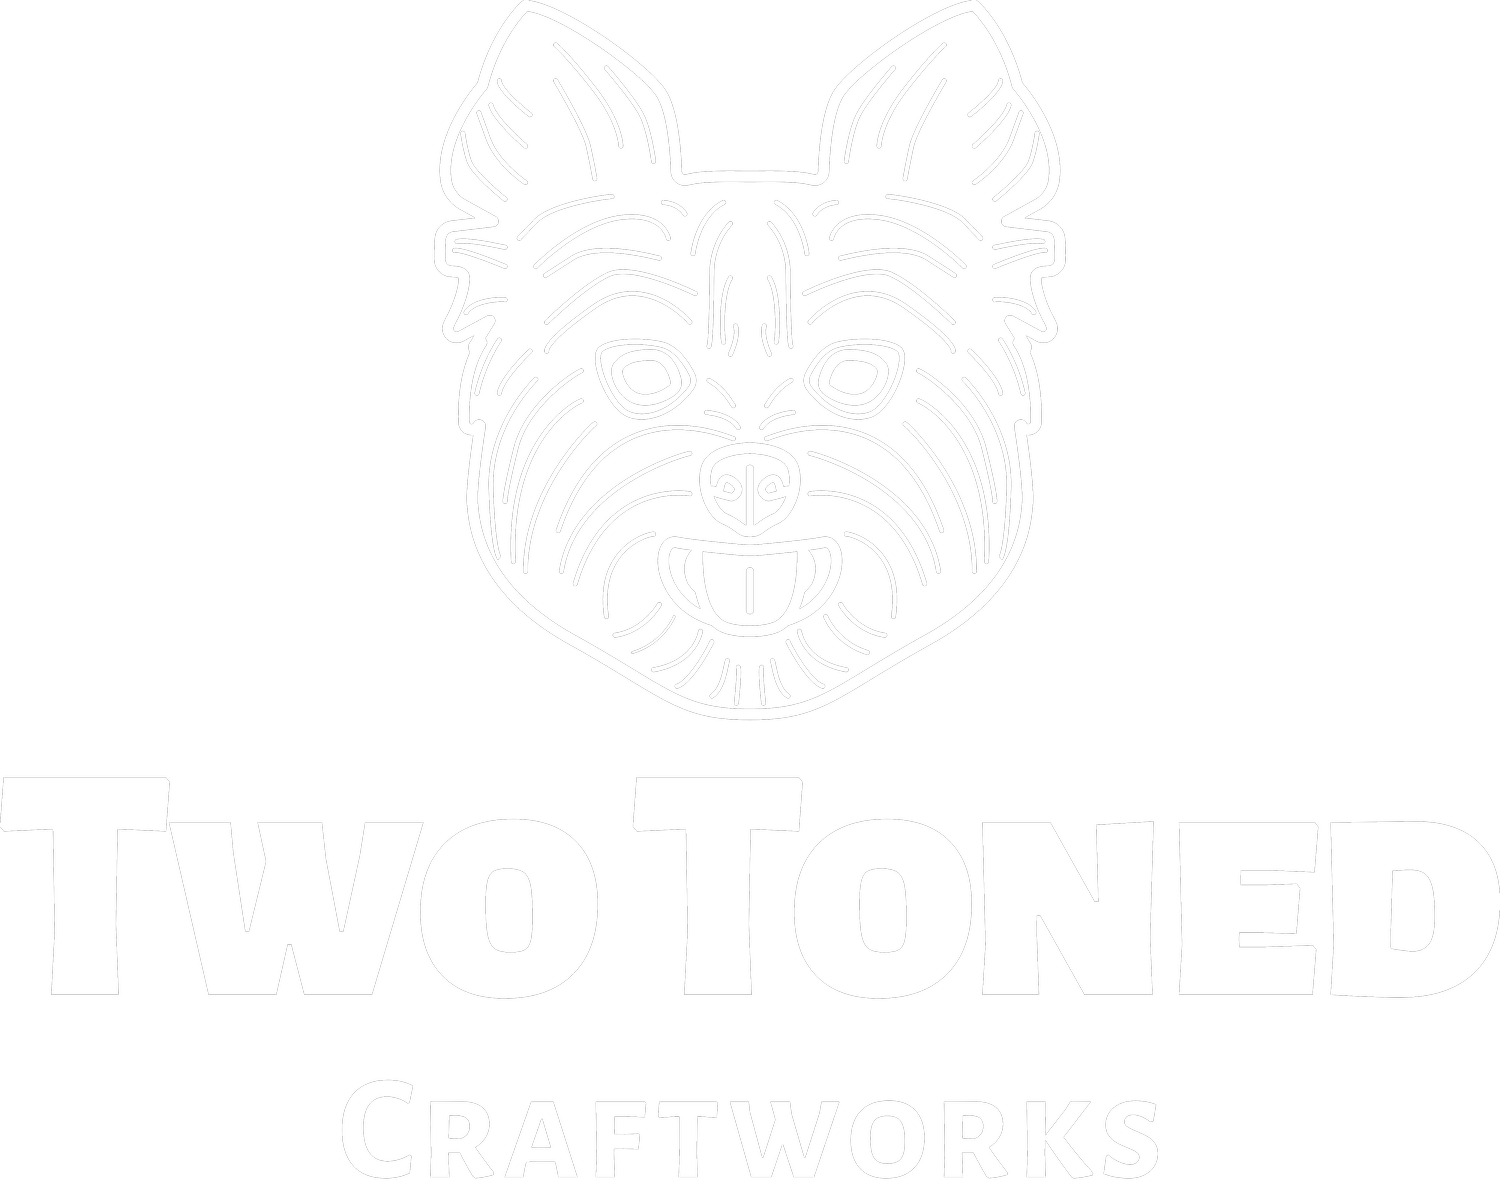 Two Toned Craftworks 